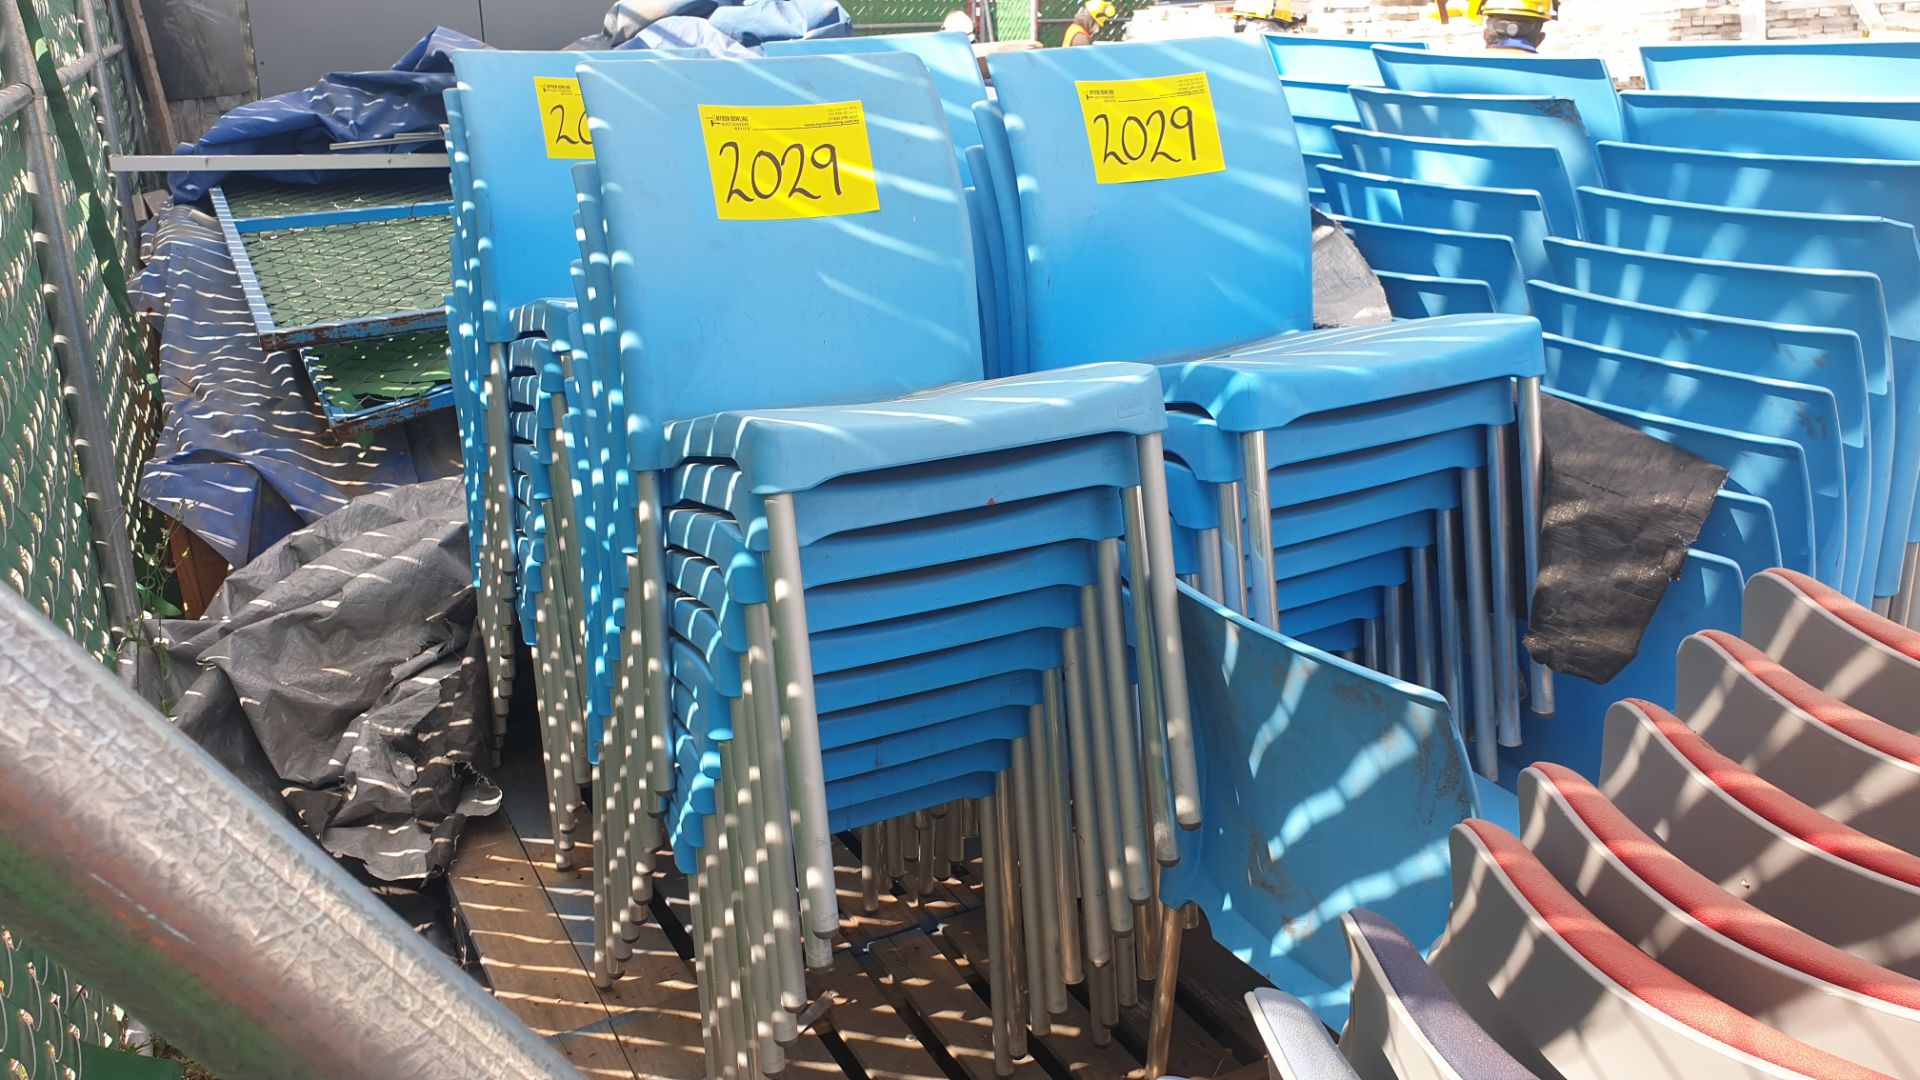 1 Lote of 40 blue plastic chairs, 7 metal chairs for office with backrest and upholstered seat - Bild 11 aus 22